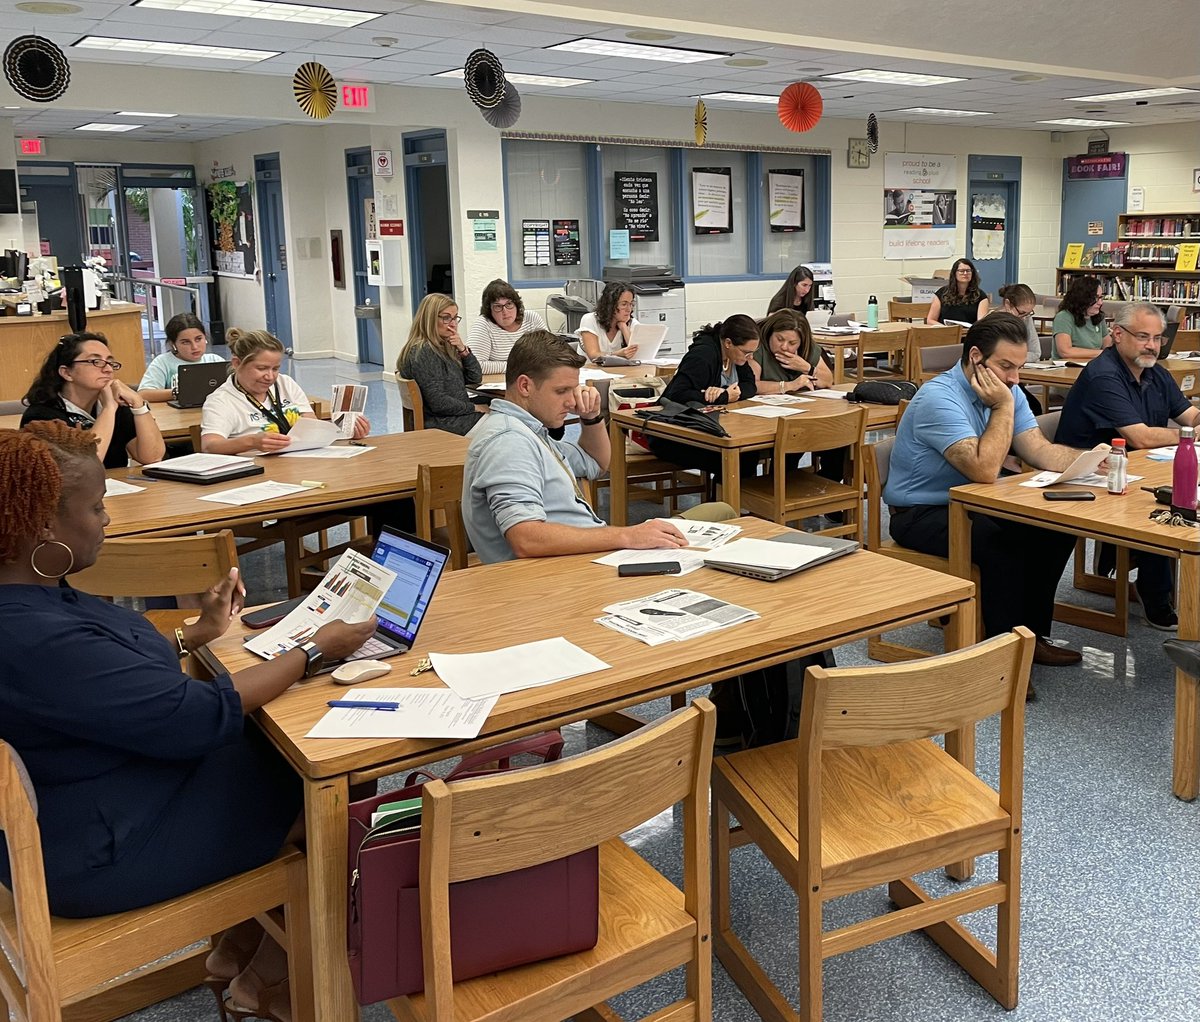 Our first SAC meeting of the year was a great success. Thank you to Mr. Kaminer for facilitating and for all in attendance @NDeluz @MichaelCrumAp @TeKreshiaJ @omniptsajaguars @RachelCapitano @southPbcsd